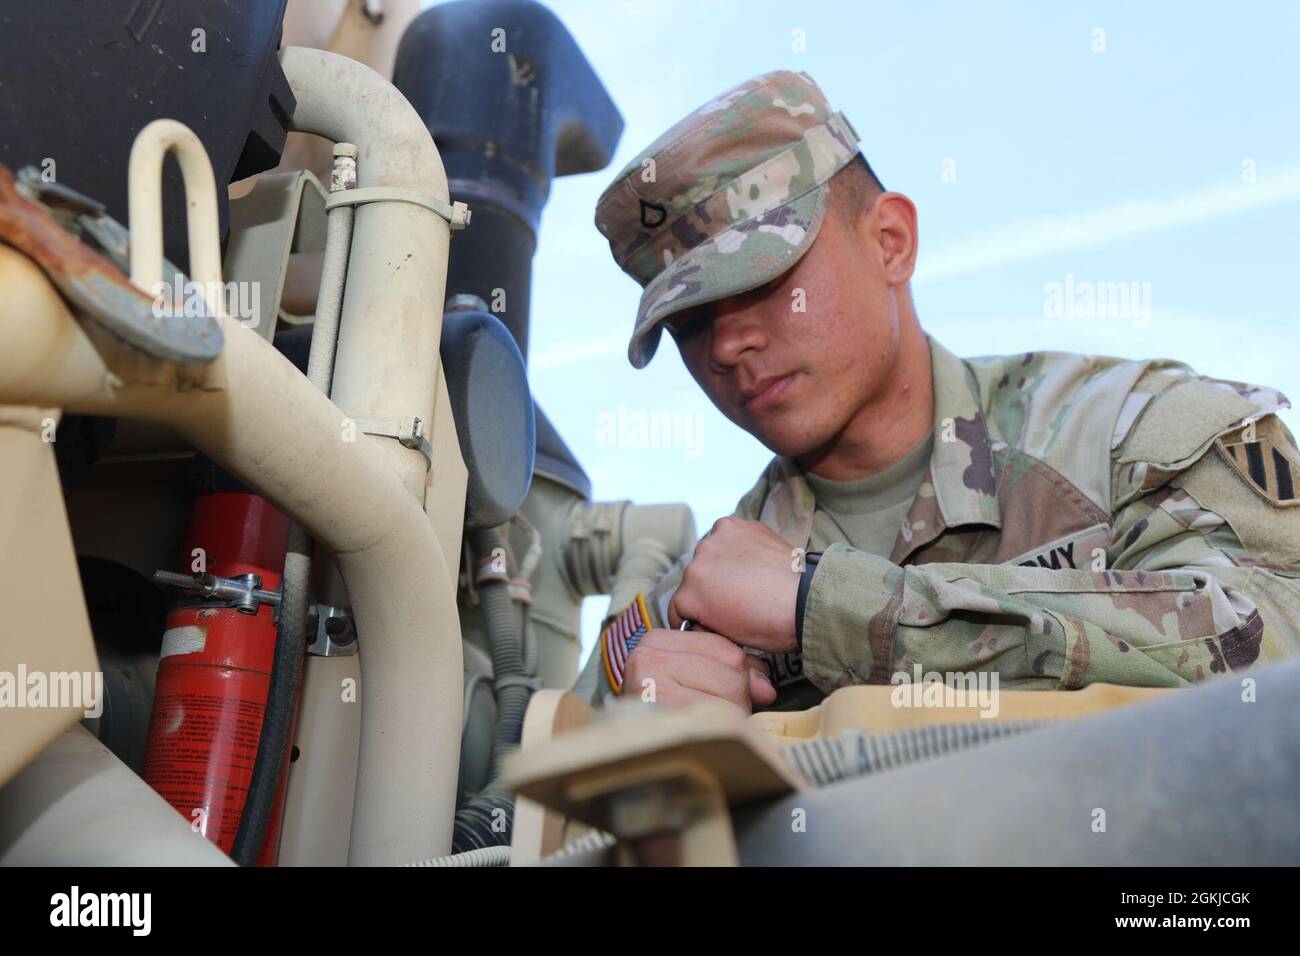 U.S. Army Pfc. Rafael Holgad, a wheeled vehicle mechanic, was born in Santo Tomas, Batangas in the Philippines and moved to Fayetteville, North Carolina in April 2019. Holgad joined the Army and went to basic training at Fort Jackson in October 2019. Holgado has two uncles who retired from the Army, as well as three cousins who currently serve; one in the Air Force and two in the Army. He currently serves with 3rd Infantry Division Artillery. “I love the Army. It has always been my dream.” Holgado hopes to retire from the Army as a sergeant major. Stock Photo